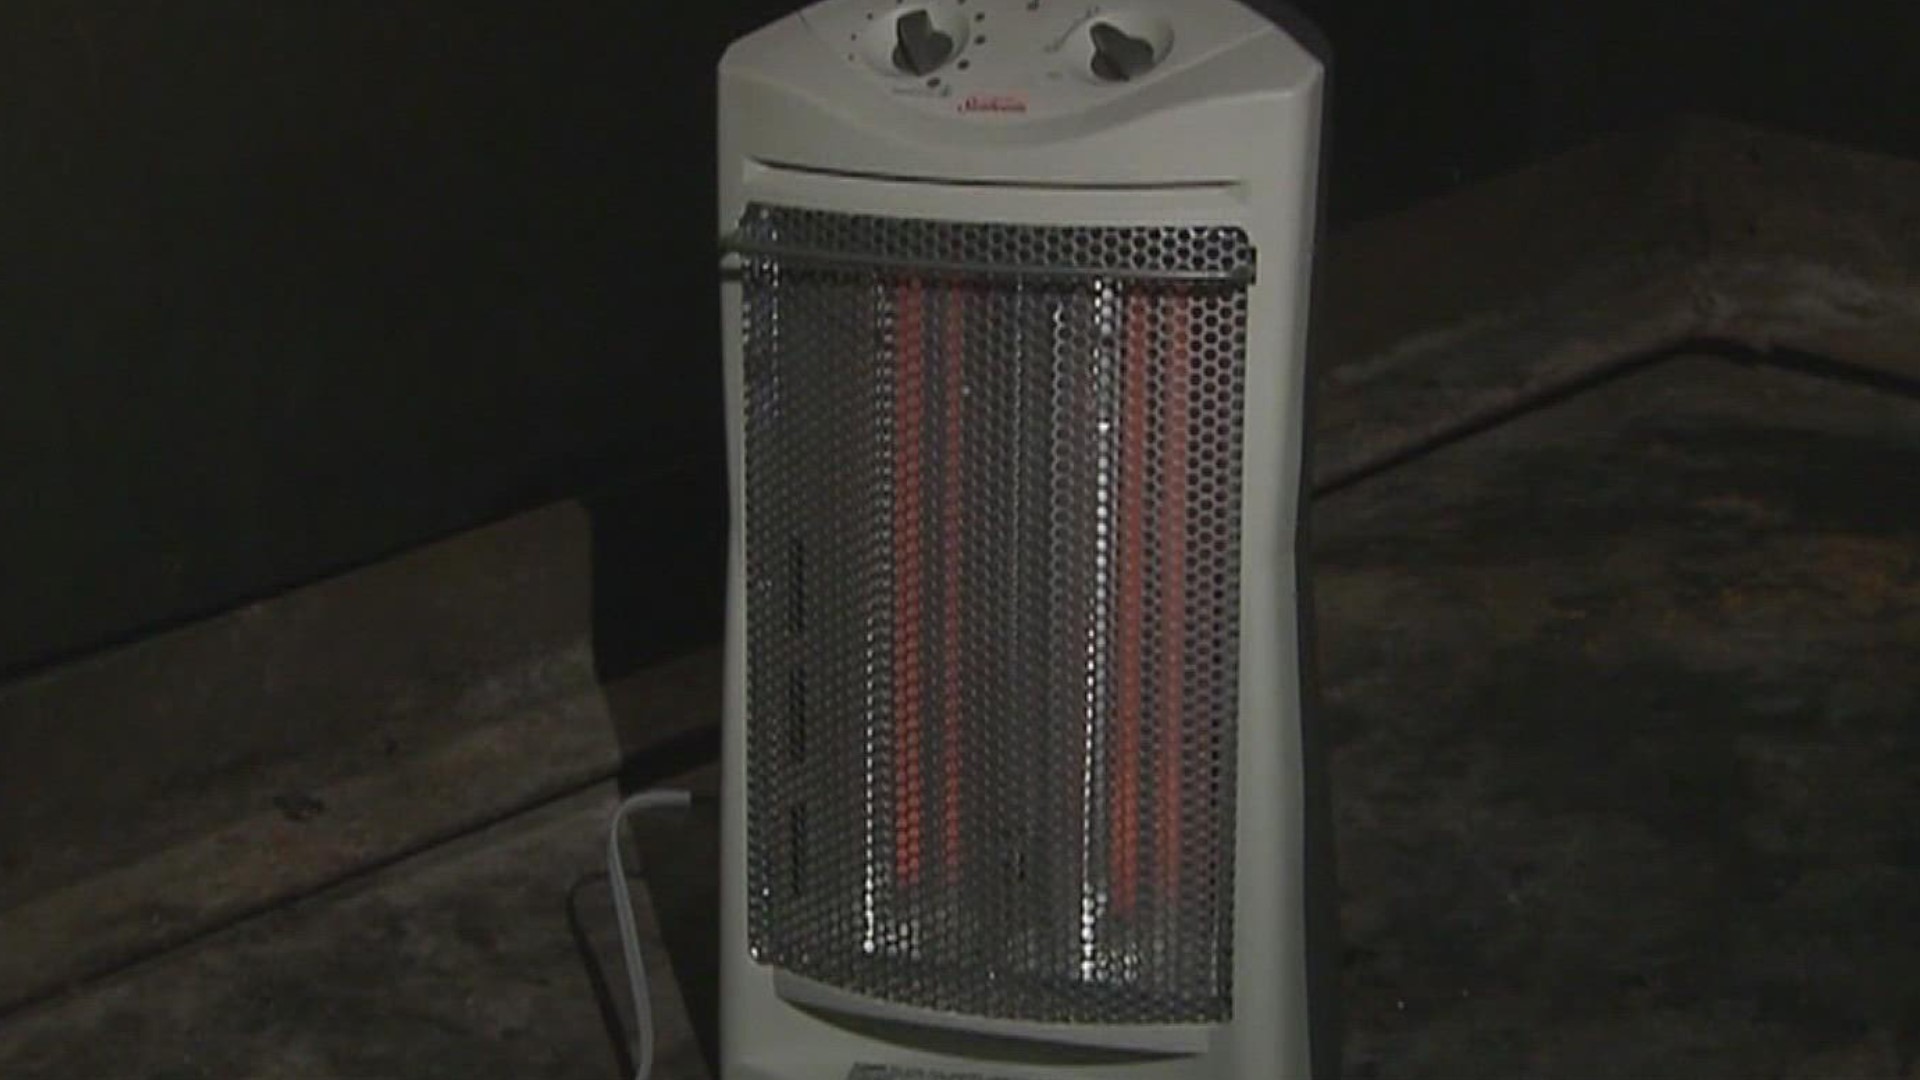 Corpus Christi Assistant Fire Chief Randy Paige said that trouble comes when space heaters are set too close to flammable items such as drapes.